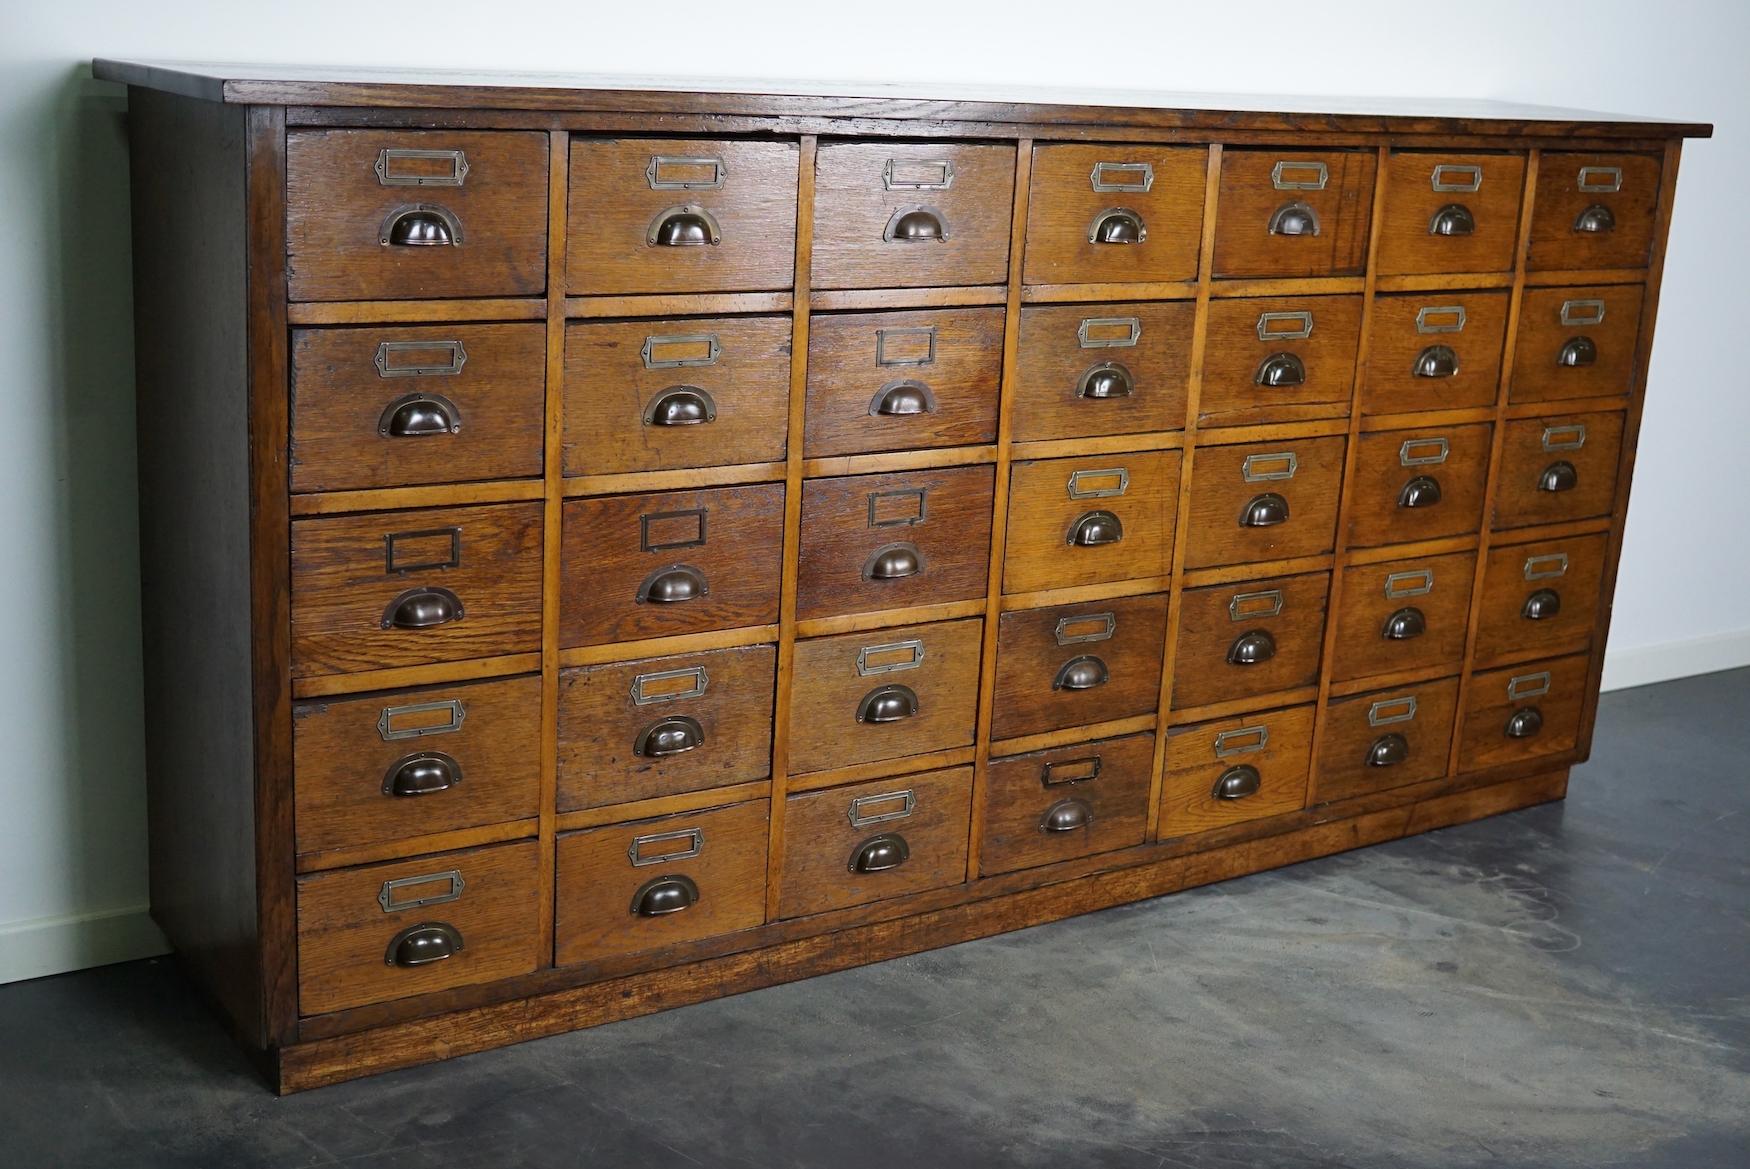 This apothecary cabinet was made circa 1930s in Germany. It features 35 decent sized drawers with cup handles and name card holders. The interior dimensions of the drawers are: DWH 35 x 24 x 14 cm. The cabinet retained a nice and rich patina over